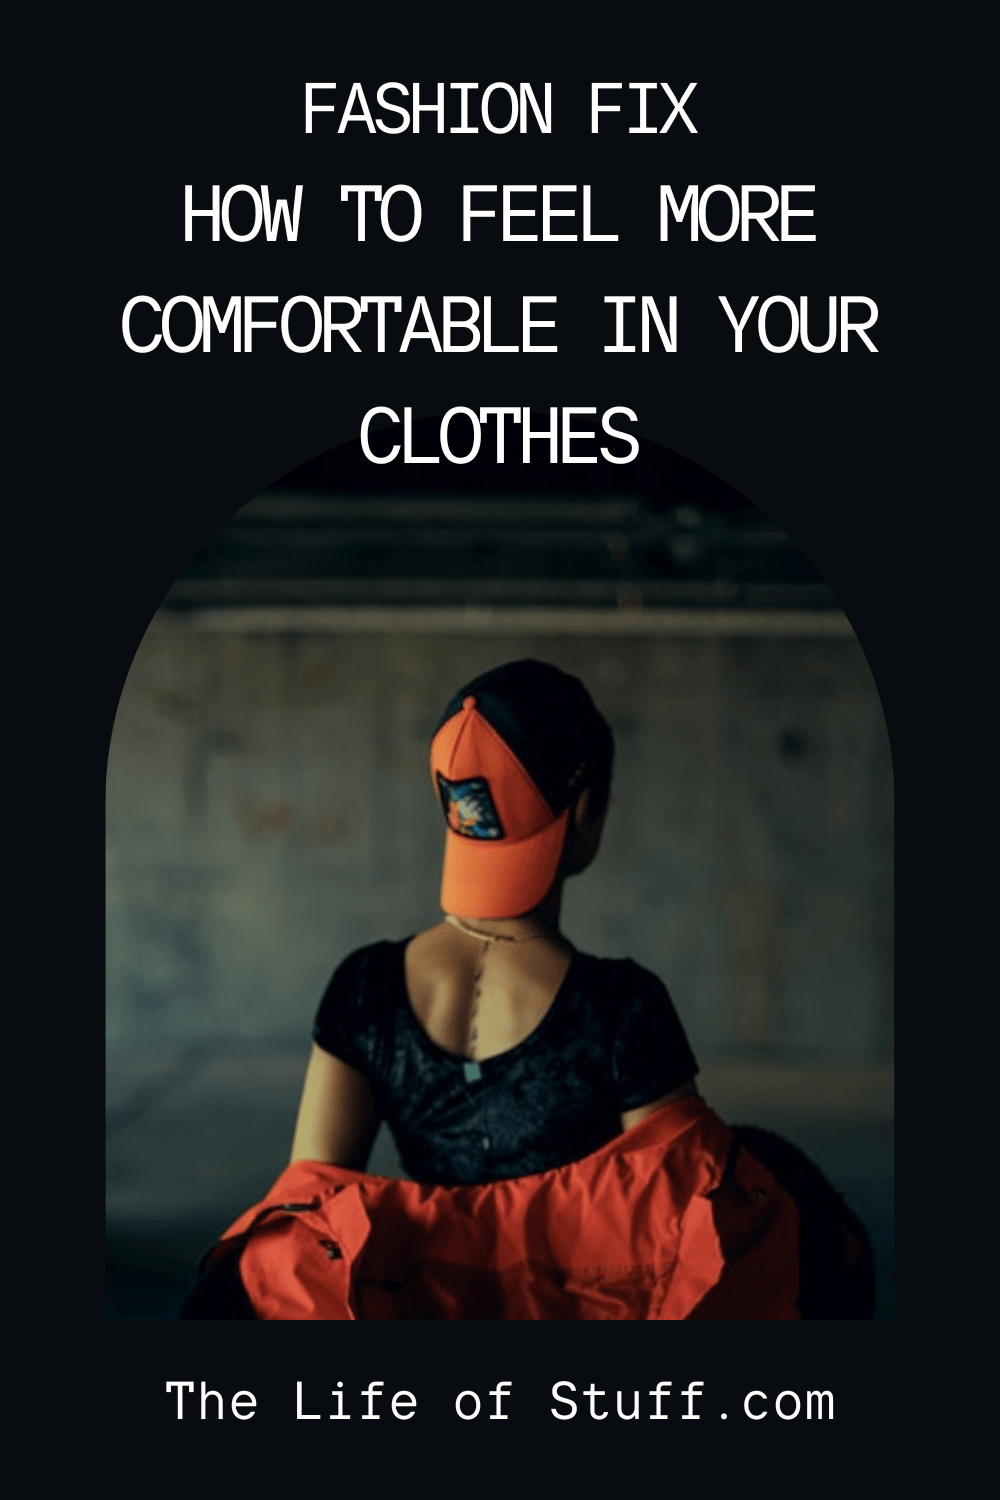 Fashion Fix - How To Feel More Comfortable In Your Clothes - The Life of Stuff